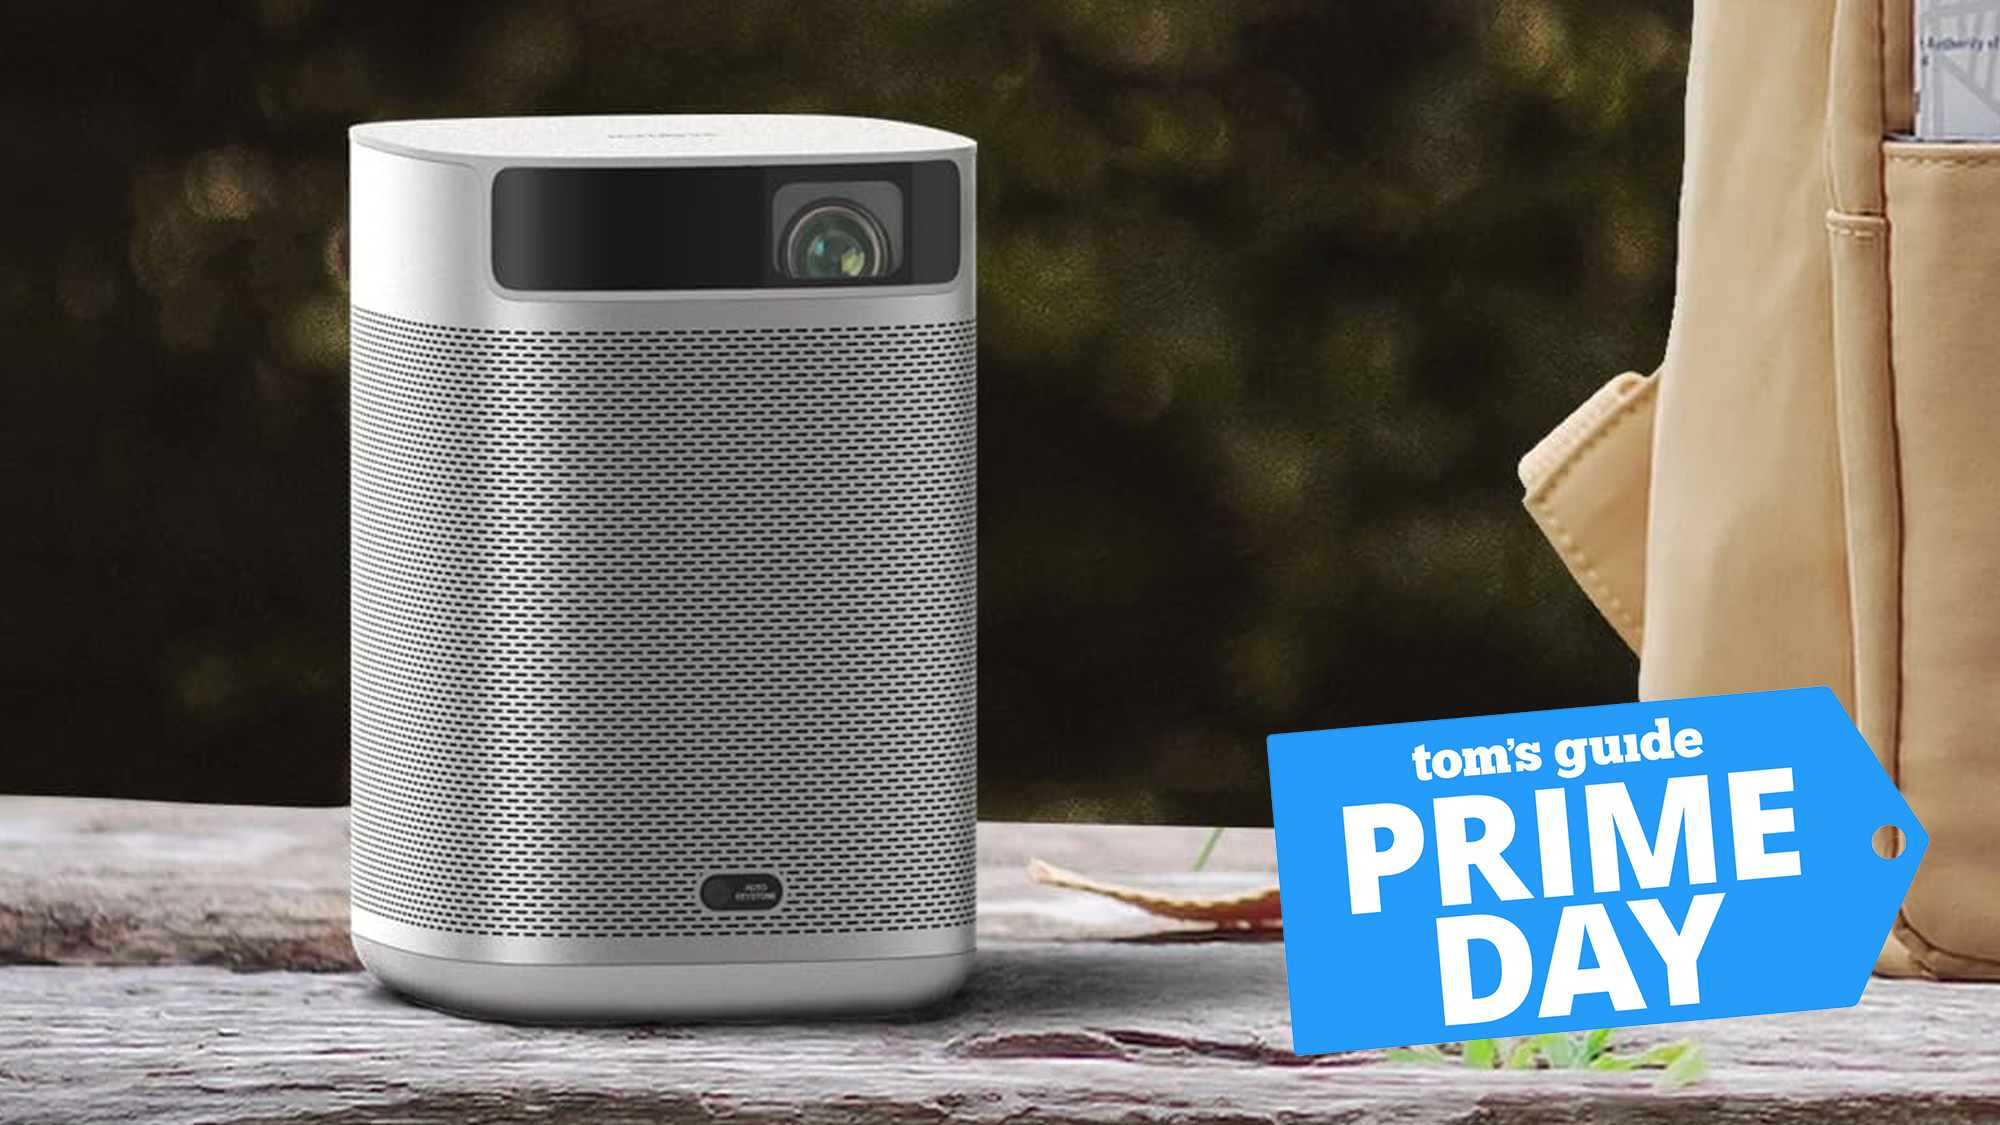 XGIMI MoGo 2 Pro review: The best portable projector gets even better